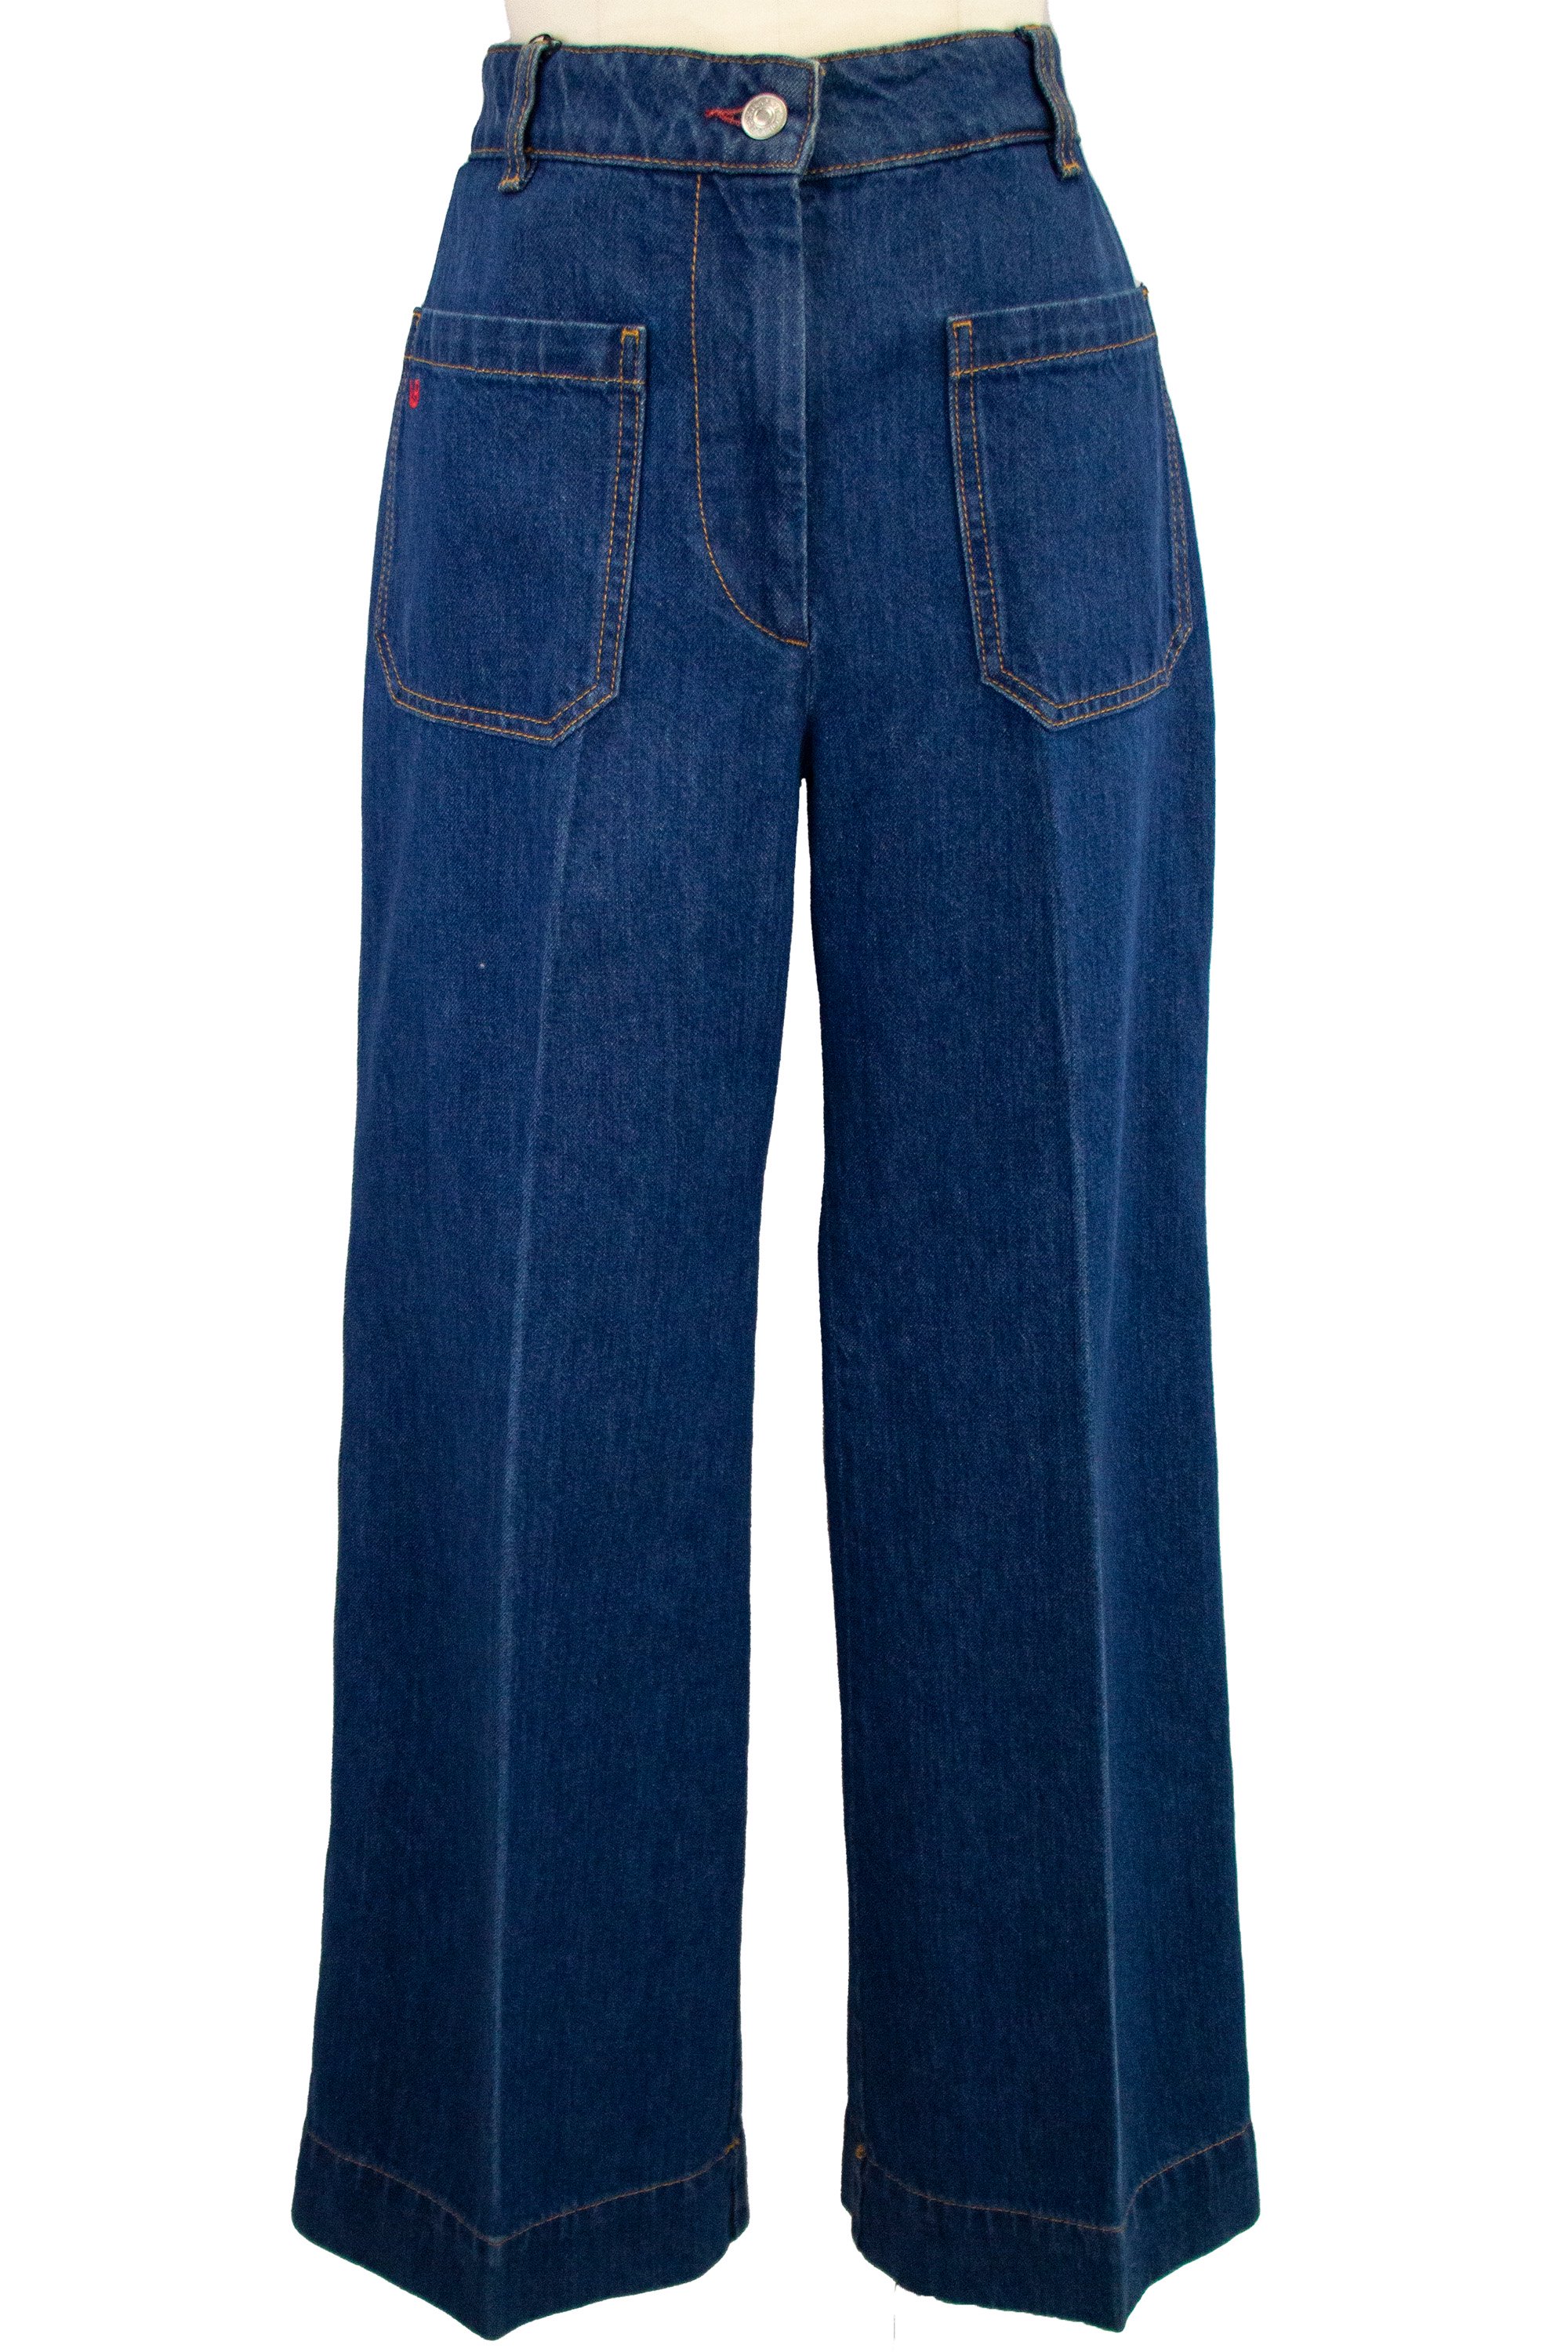 <img class='new_mark_img1' src='https://img.shop-pro.jp/img/new/icons8.gif' style='border:none;display:inline;margin:0px;padding:0px;width:auto;' />VICTORIA BECKHAM Wide denim pants